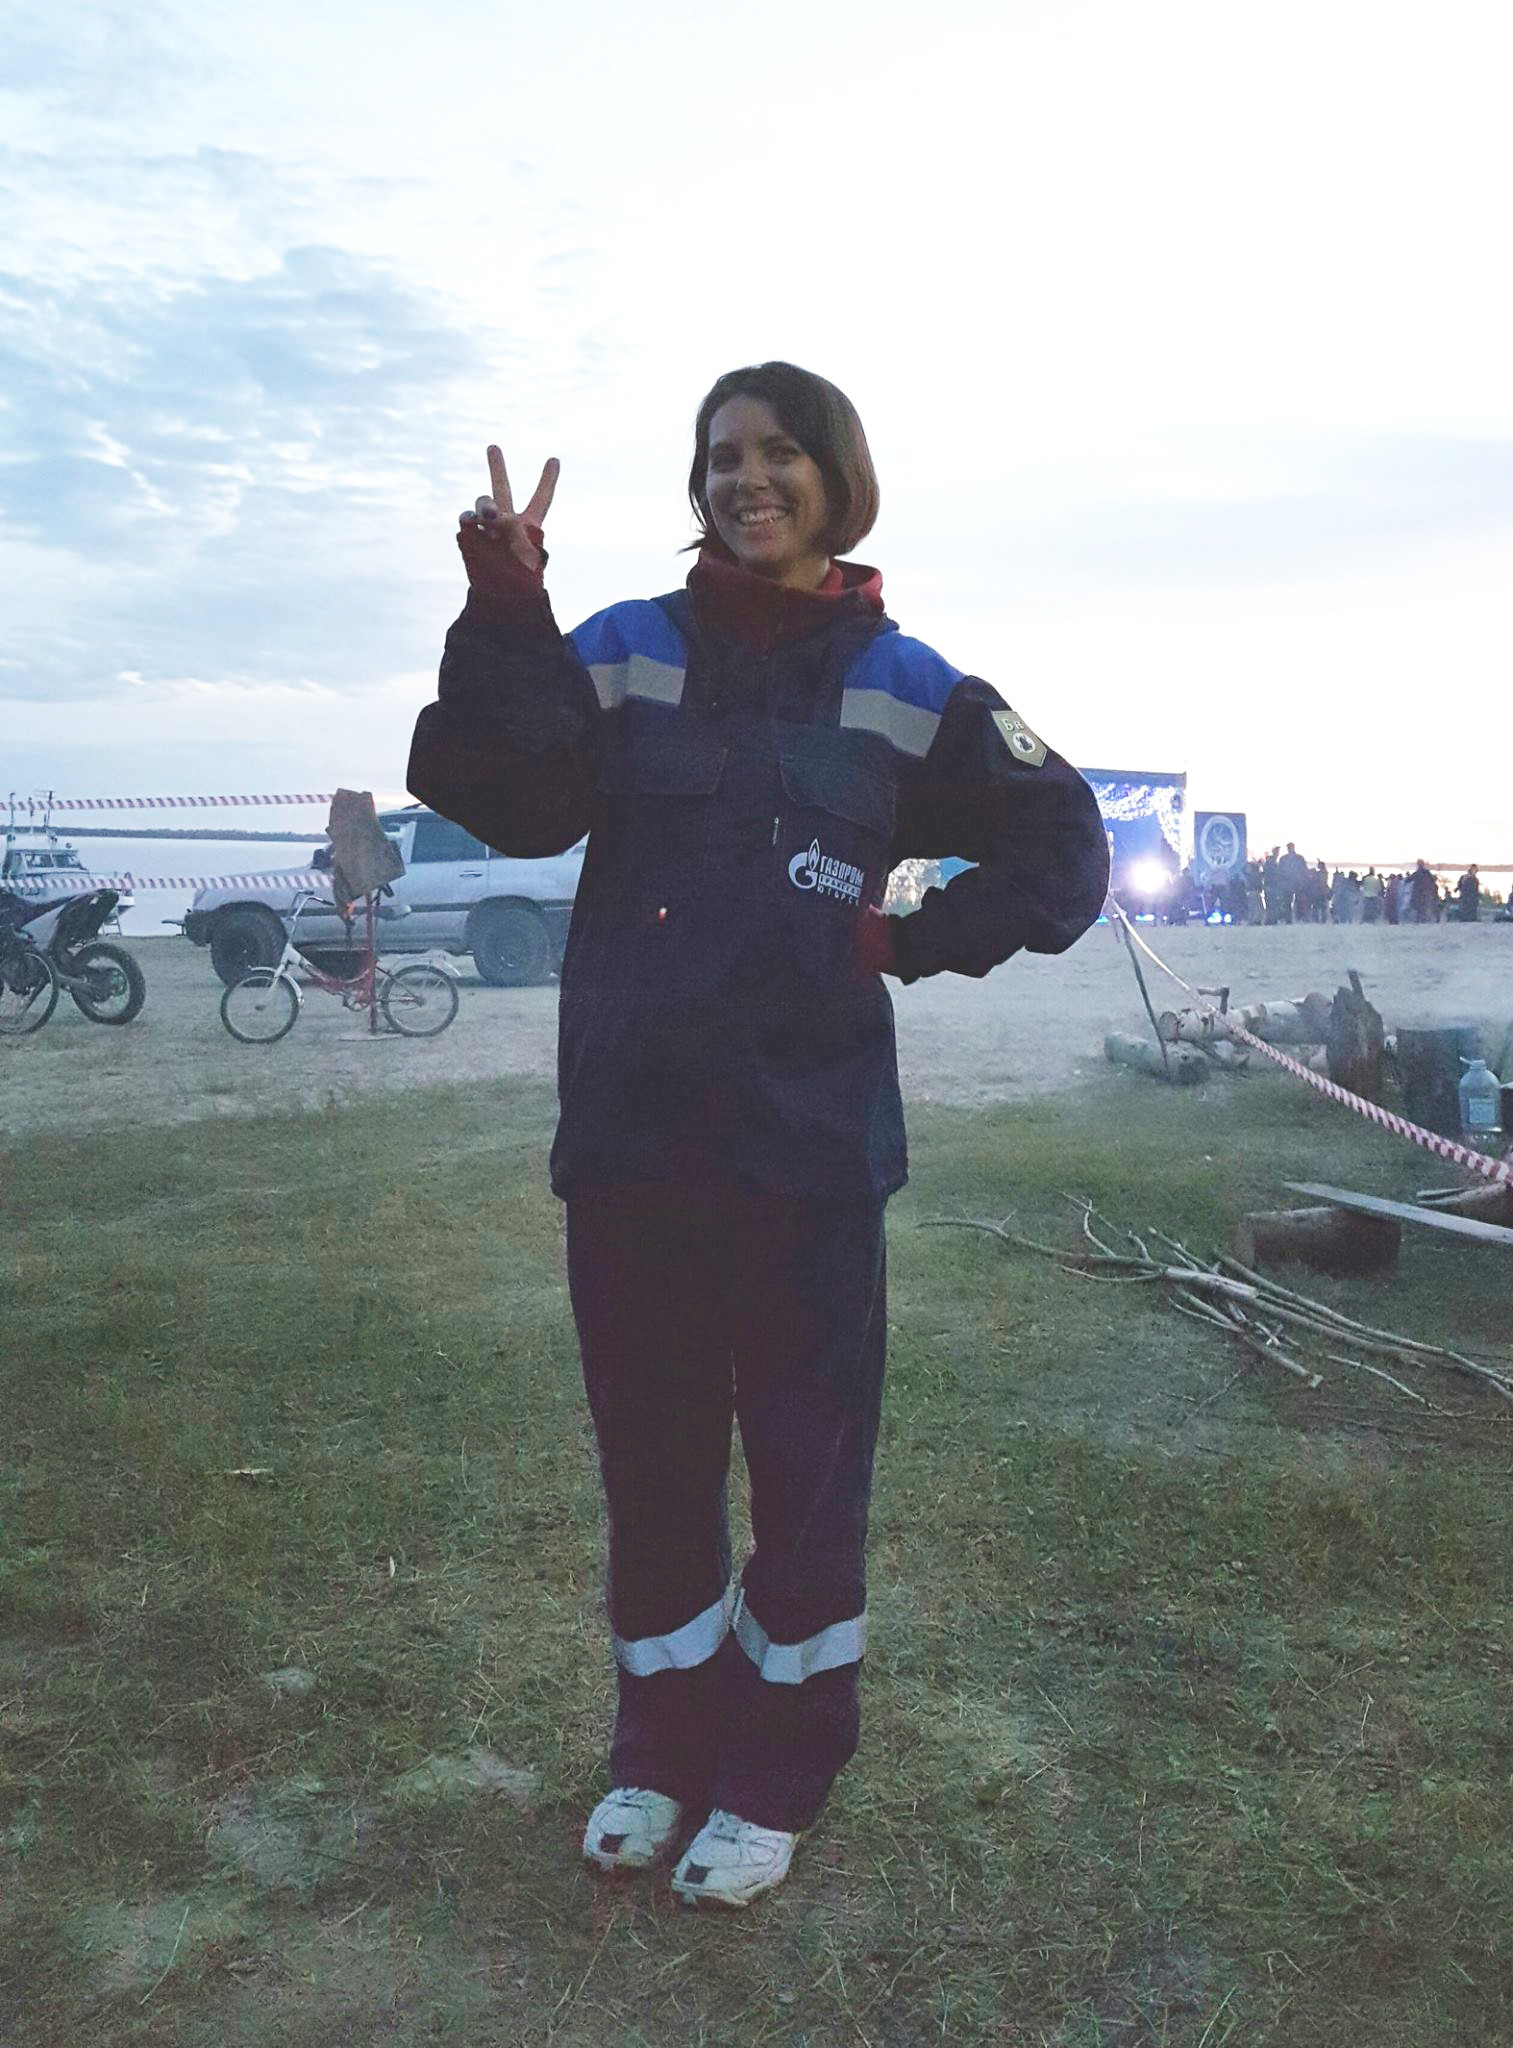 Dasha is at a festival organised by Gazprom for its workers on the Ob river near the village of Peregrebnoe. As it got a bit colder, Dasha put on her work clothes, which she usually wears in the gas field near her home some 300km further north. The photo was actually taken at midnight!